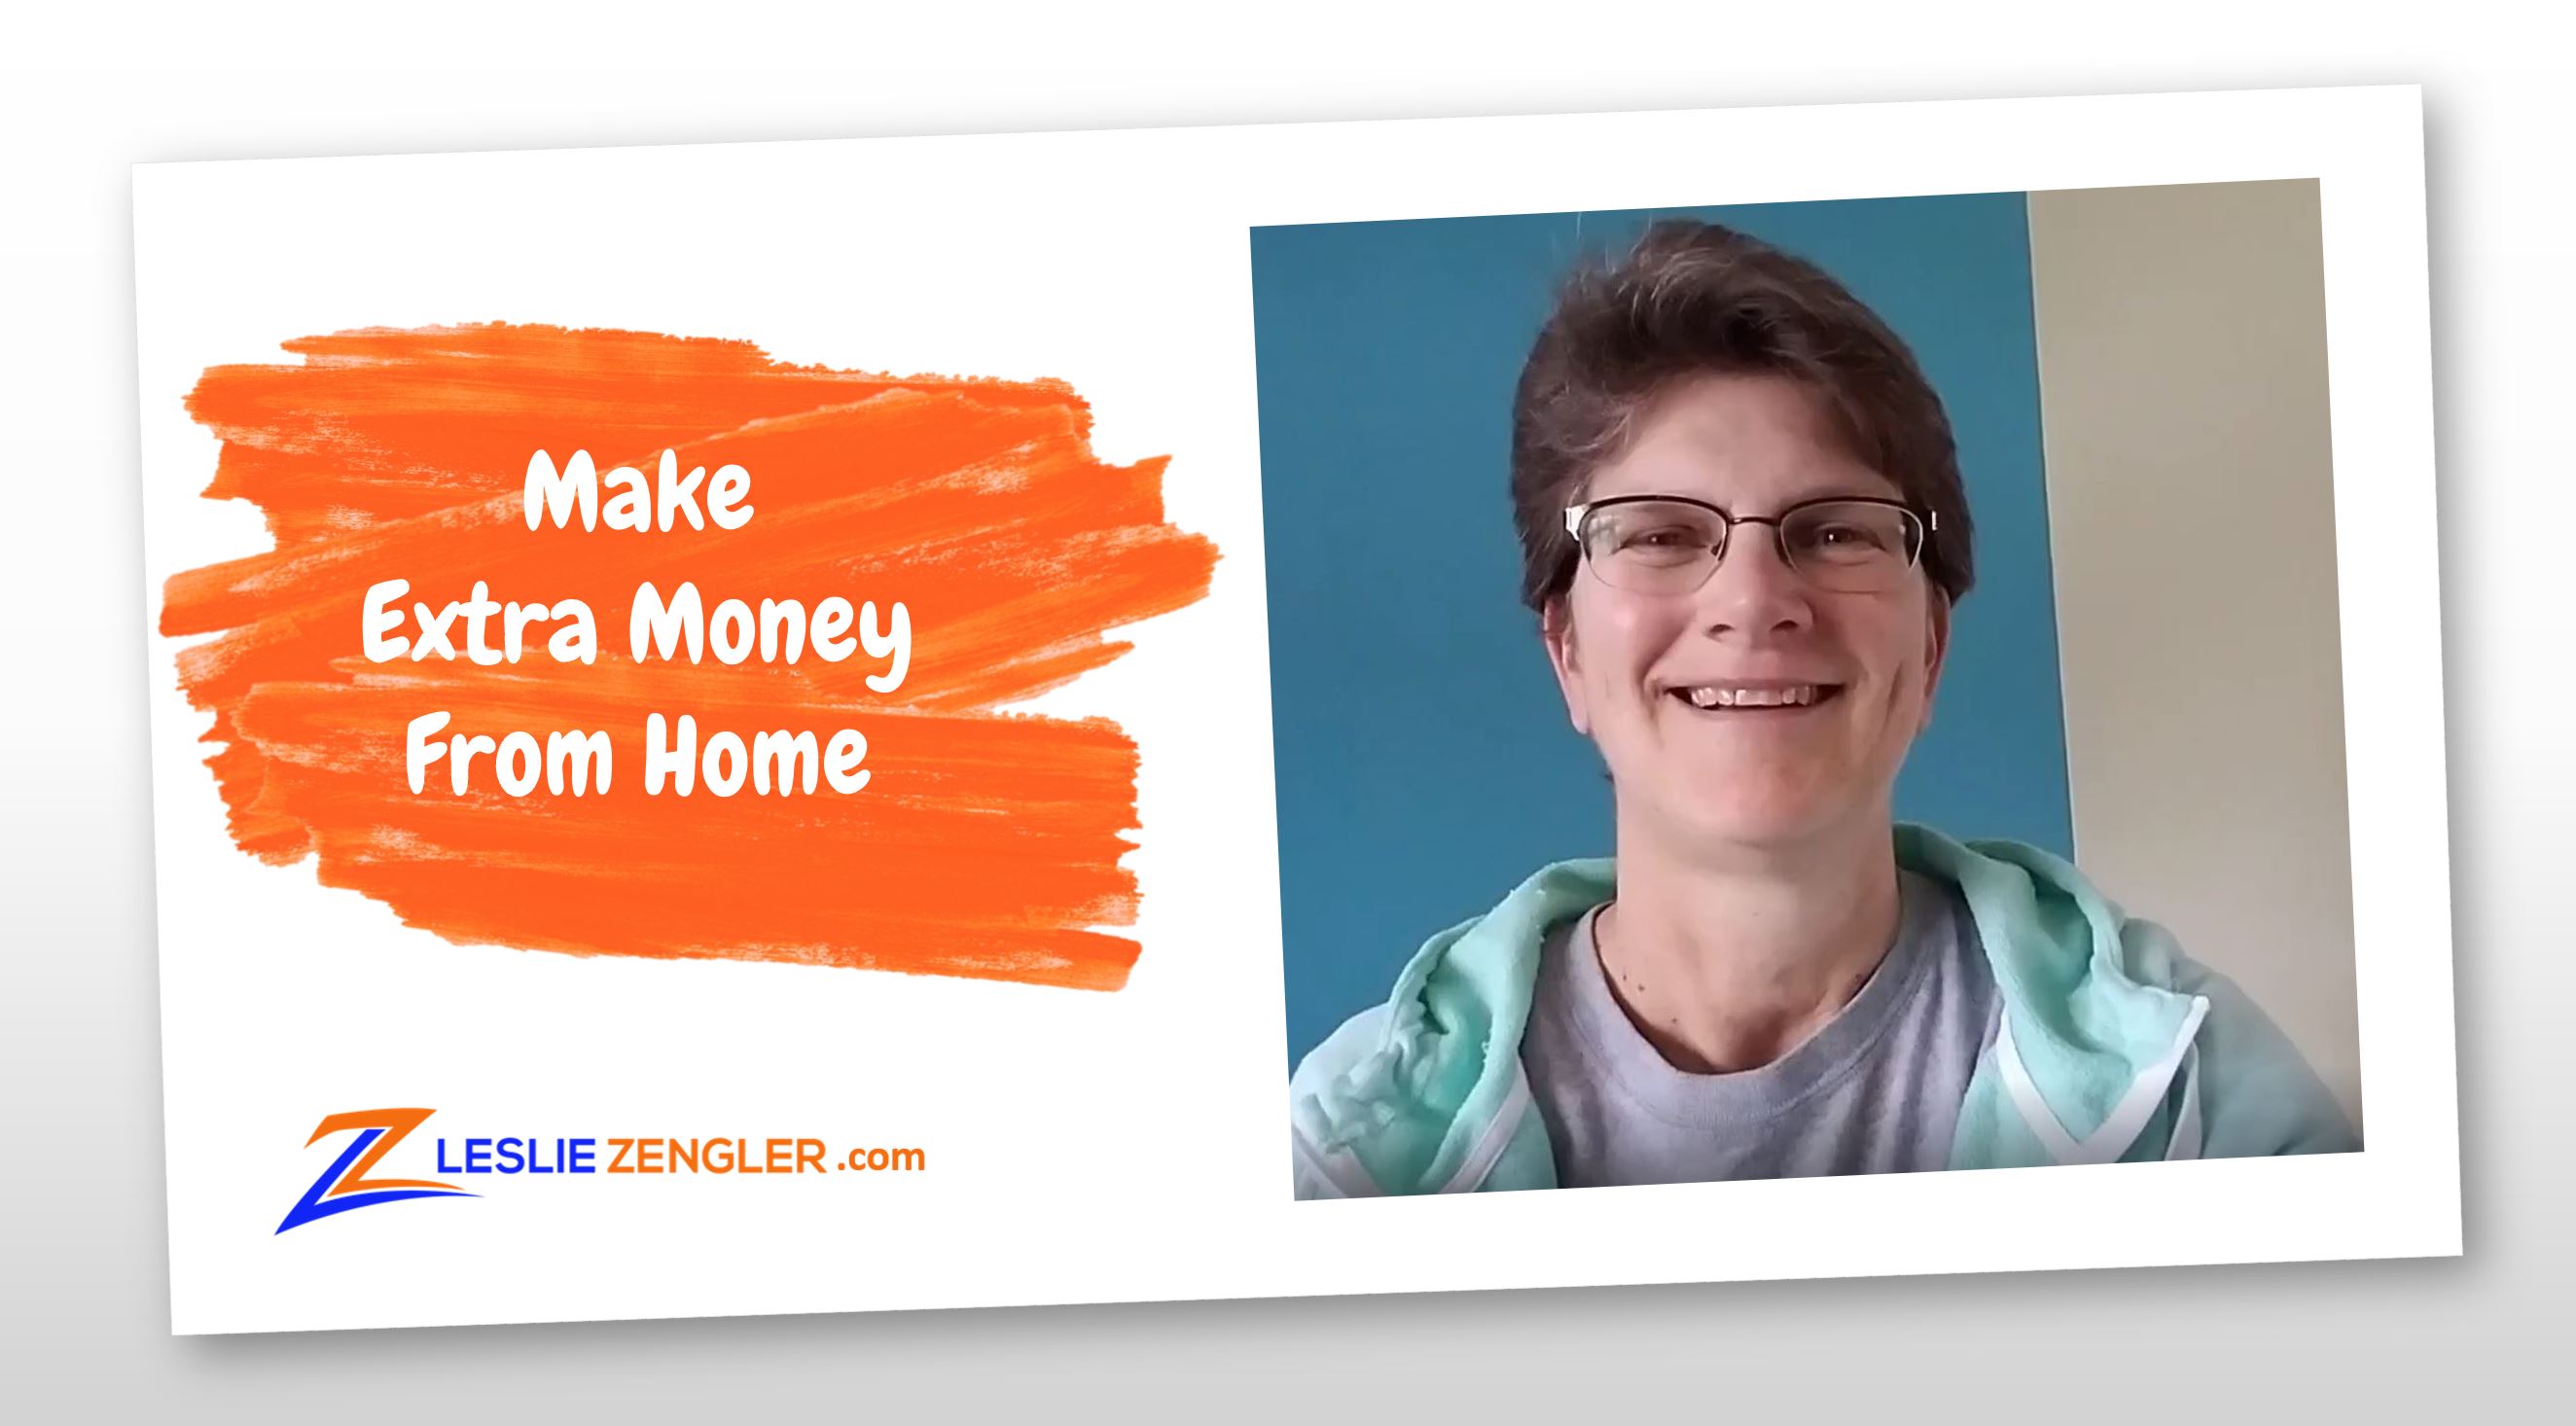 How To Make Extra Money From Home